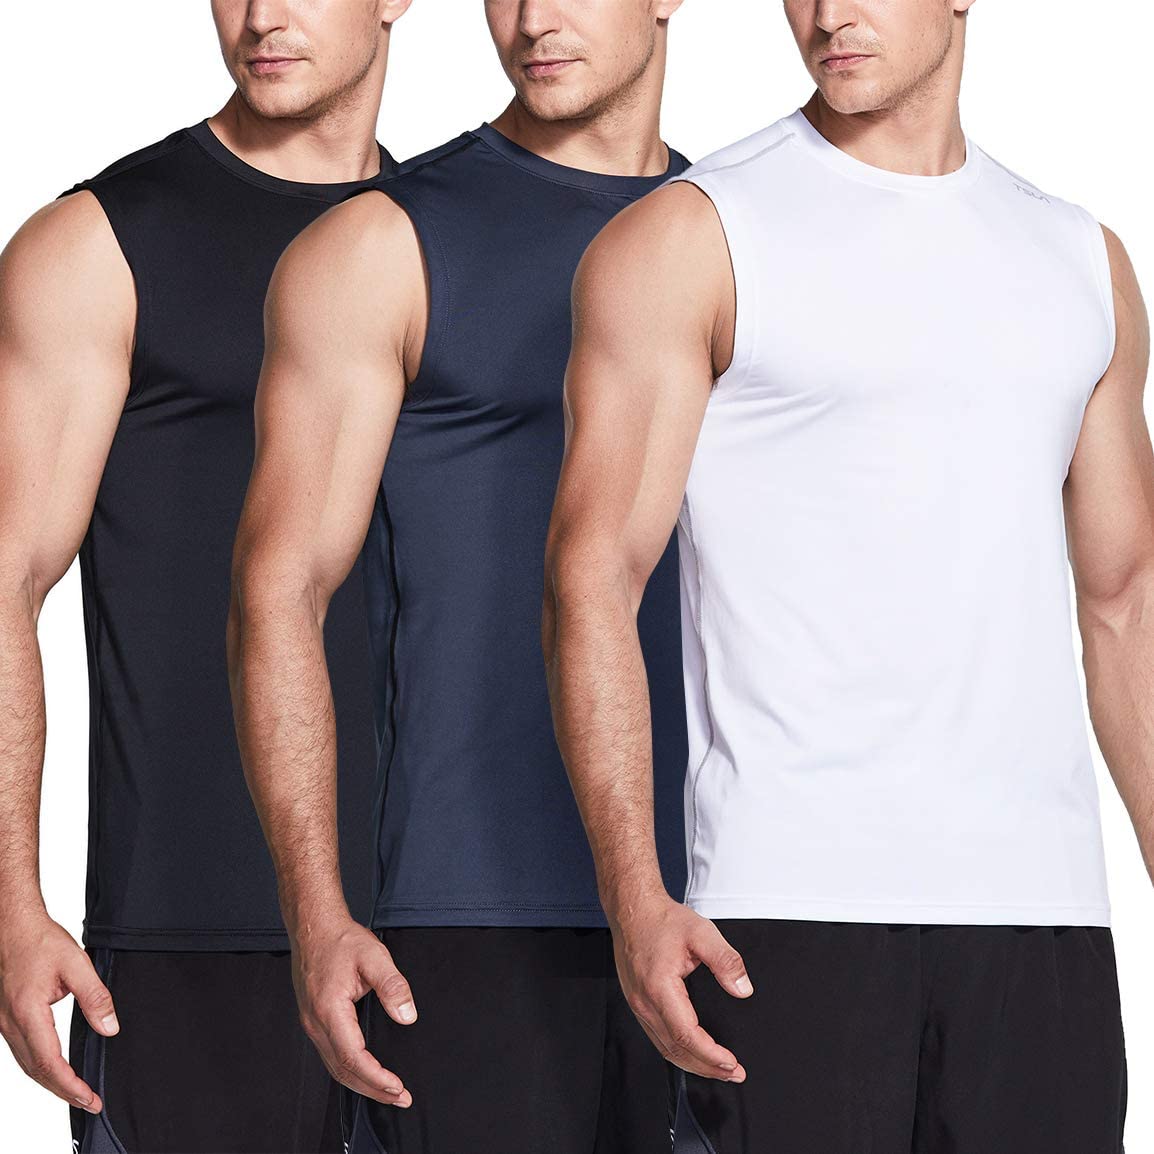 Dry Fit Workout Gym Tank Tops Performance Athletic Muscle Shirts TSLA 1 or 3 Pack Mens Sleeveless Running Tank Top